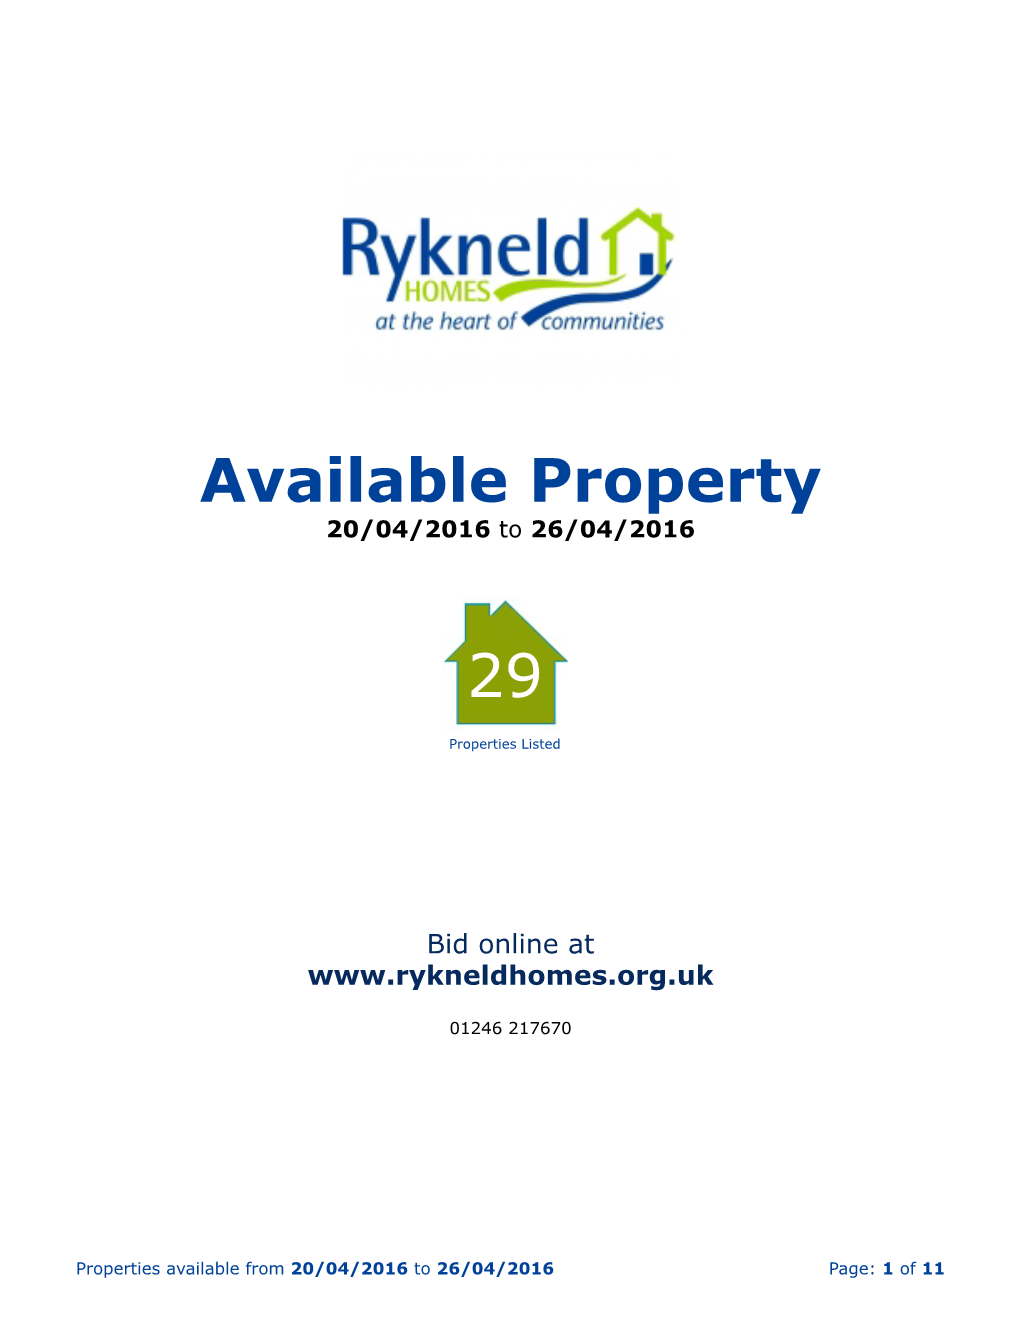 Available Property 29